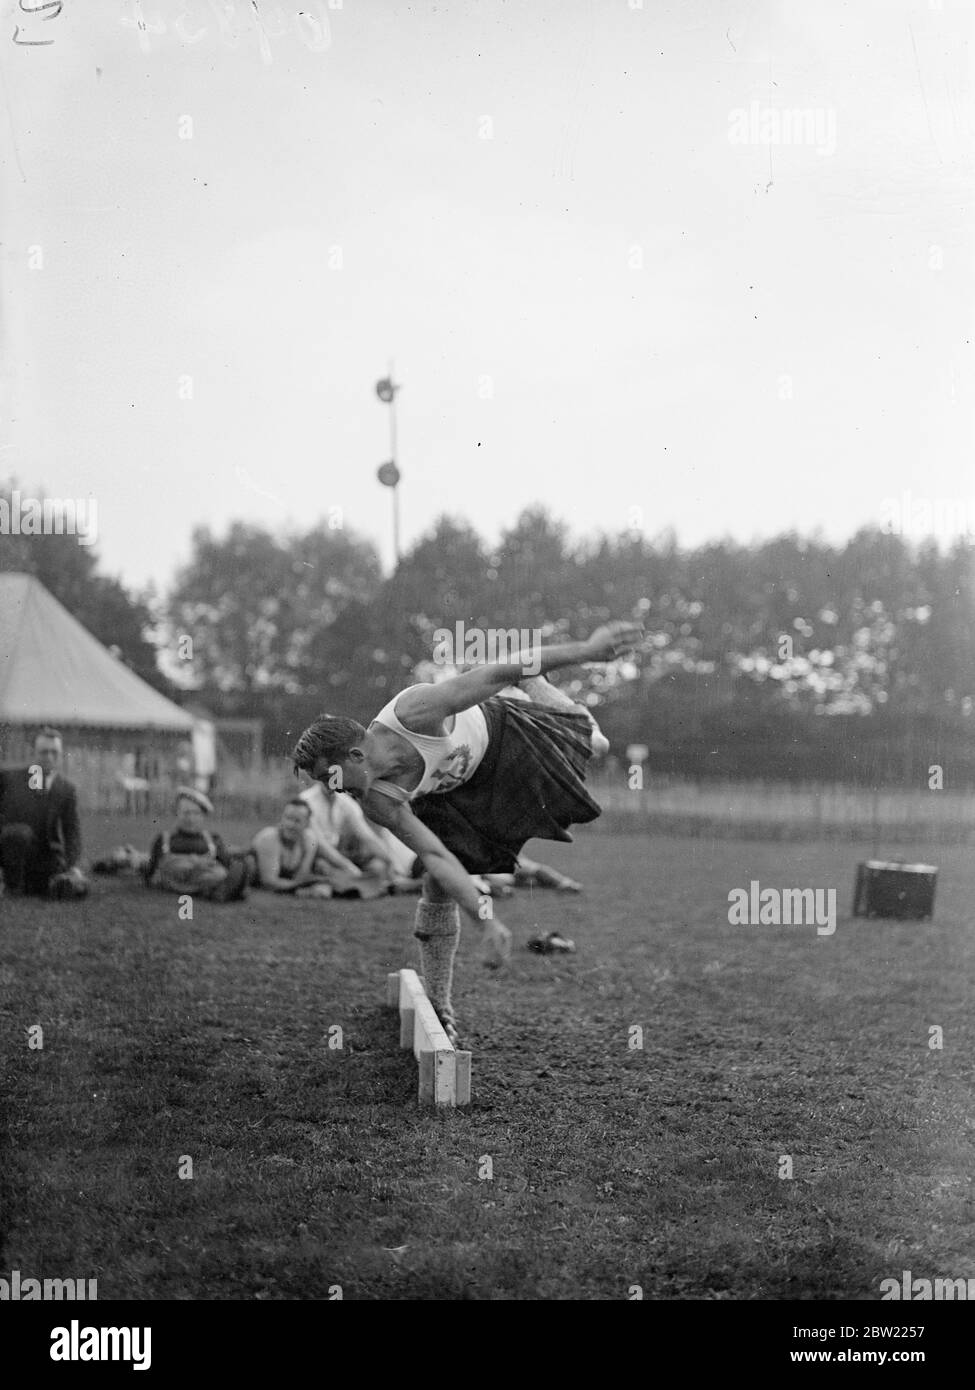 Pipers and kilted clans men invaded Ranelegh club, advanced to compete in the first Highland gathering held in London for many years. James Anderson of Dundee, one of Scotland's outstanding hammer throwers competing at the Highland games. 29 September 1937. Stock Photo